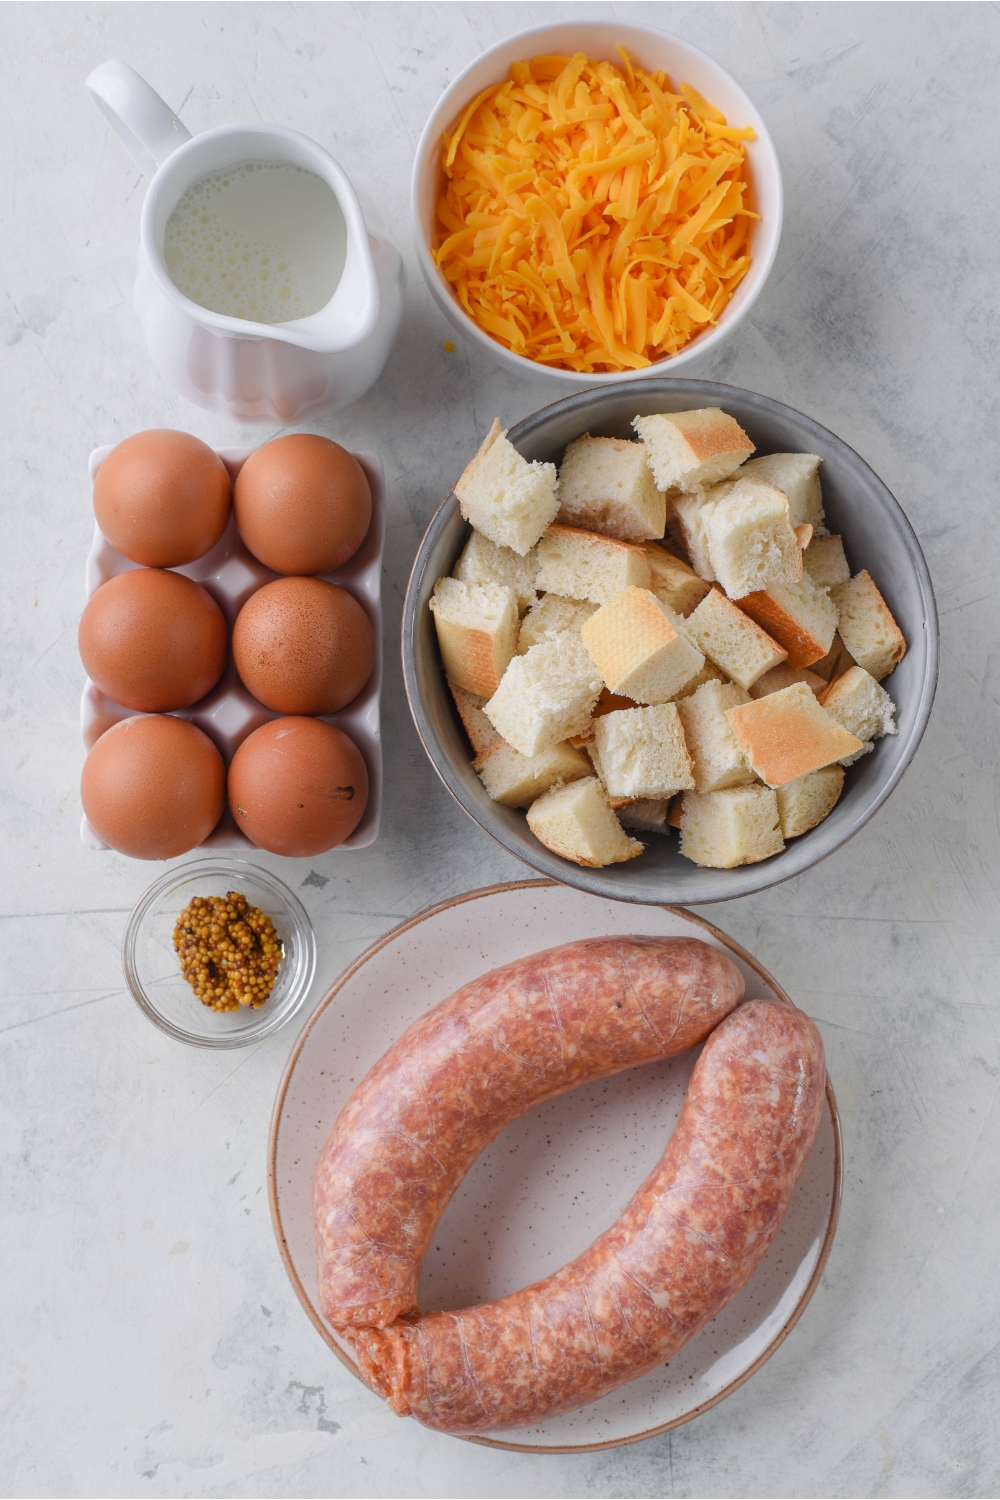 An assortment of ingredients including six eggs, a bowl of shredded cheese, a bowl of bread cubes, a plate of raw sausage, a container of milk, and a bowl of spices.